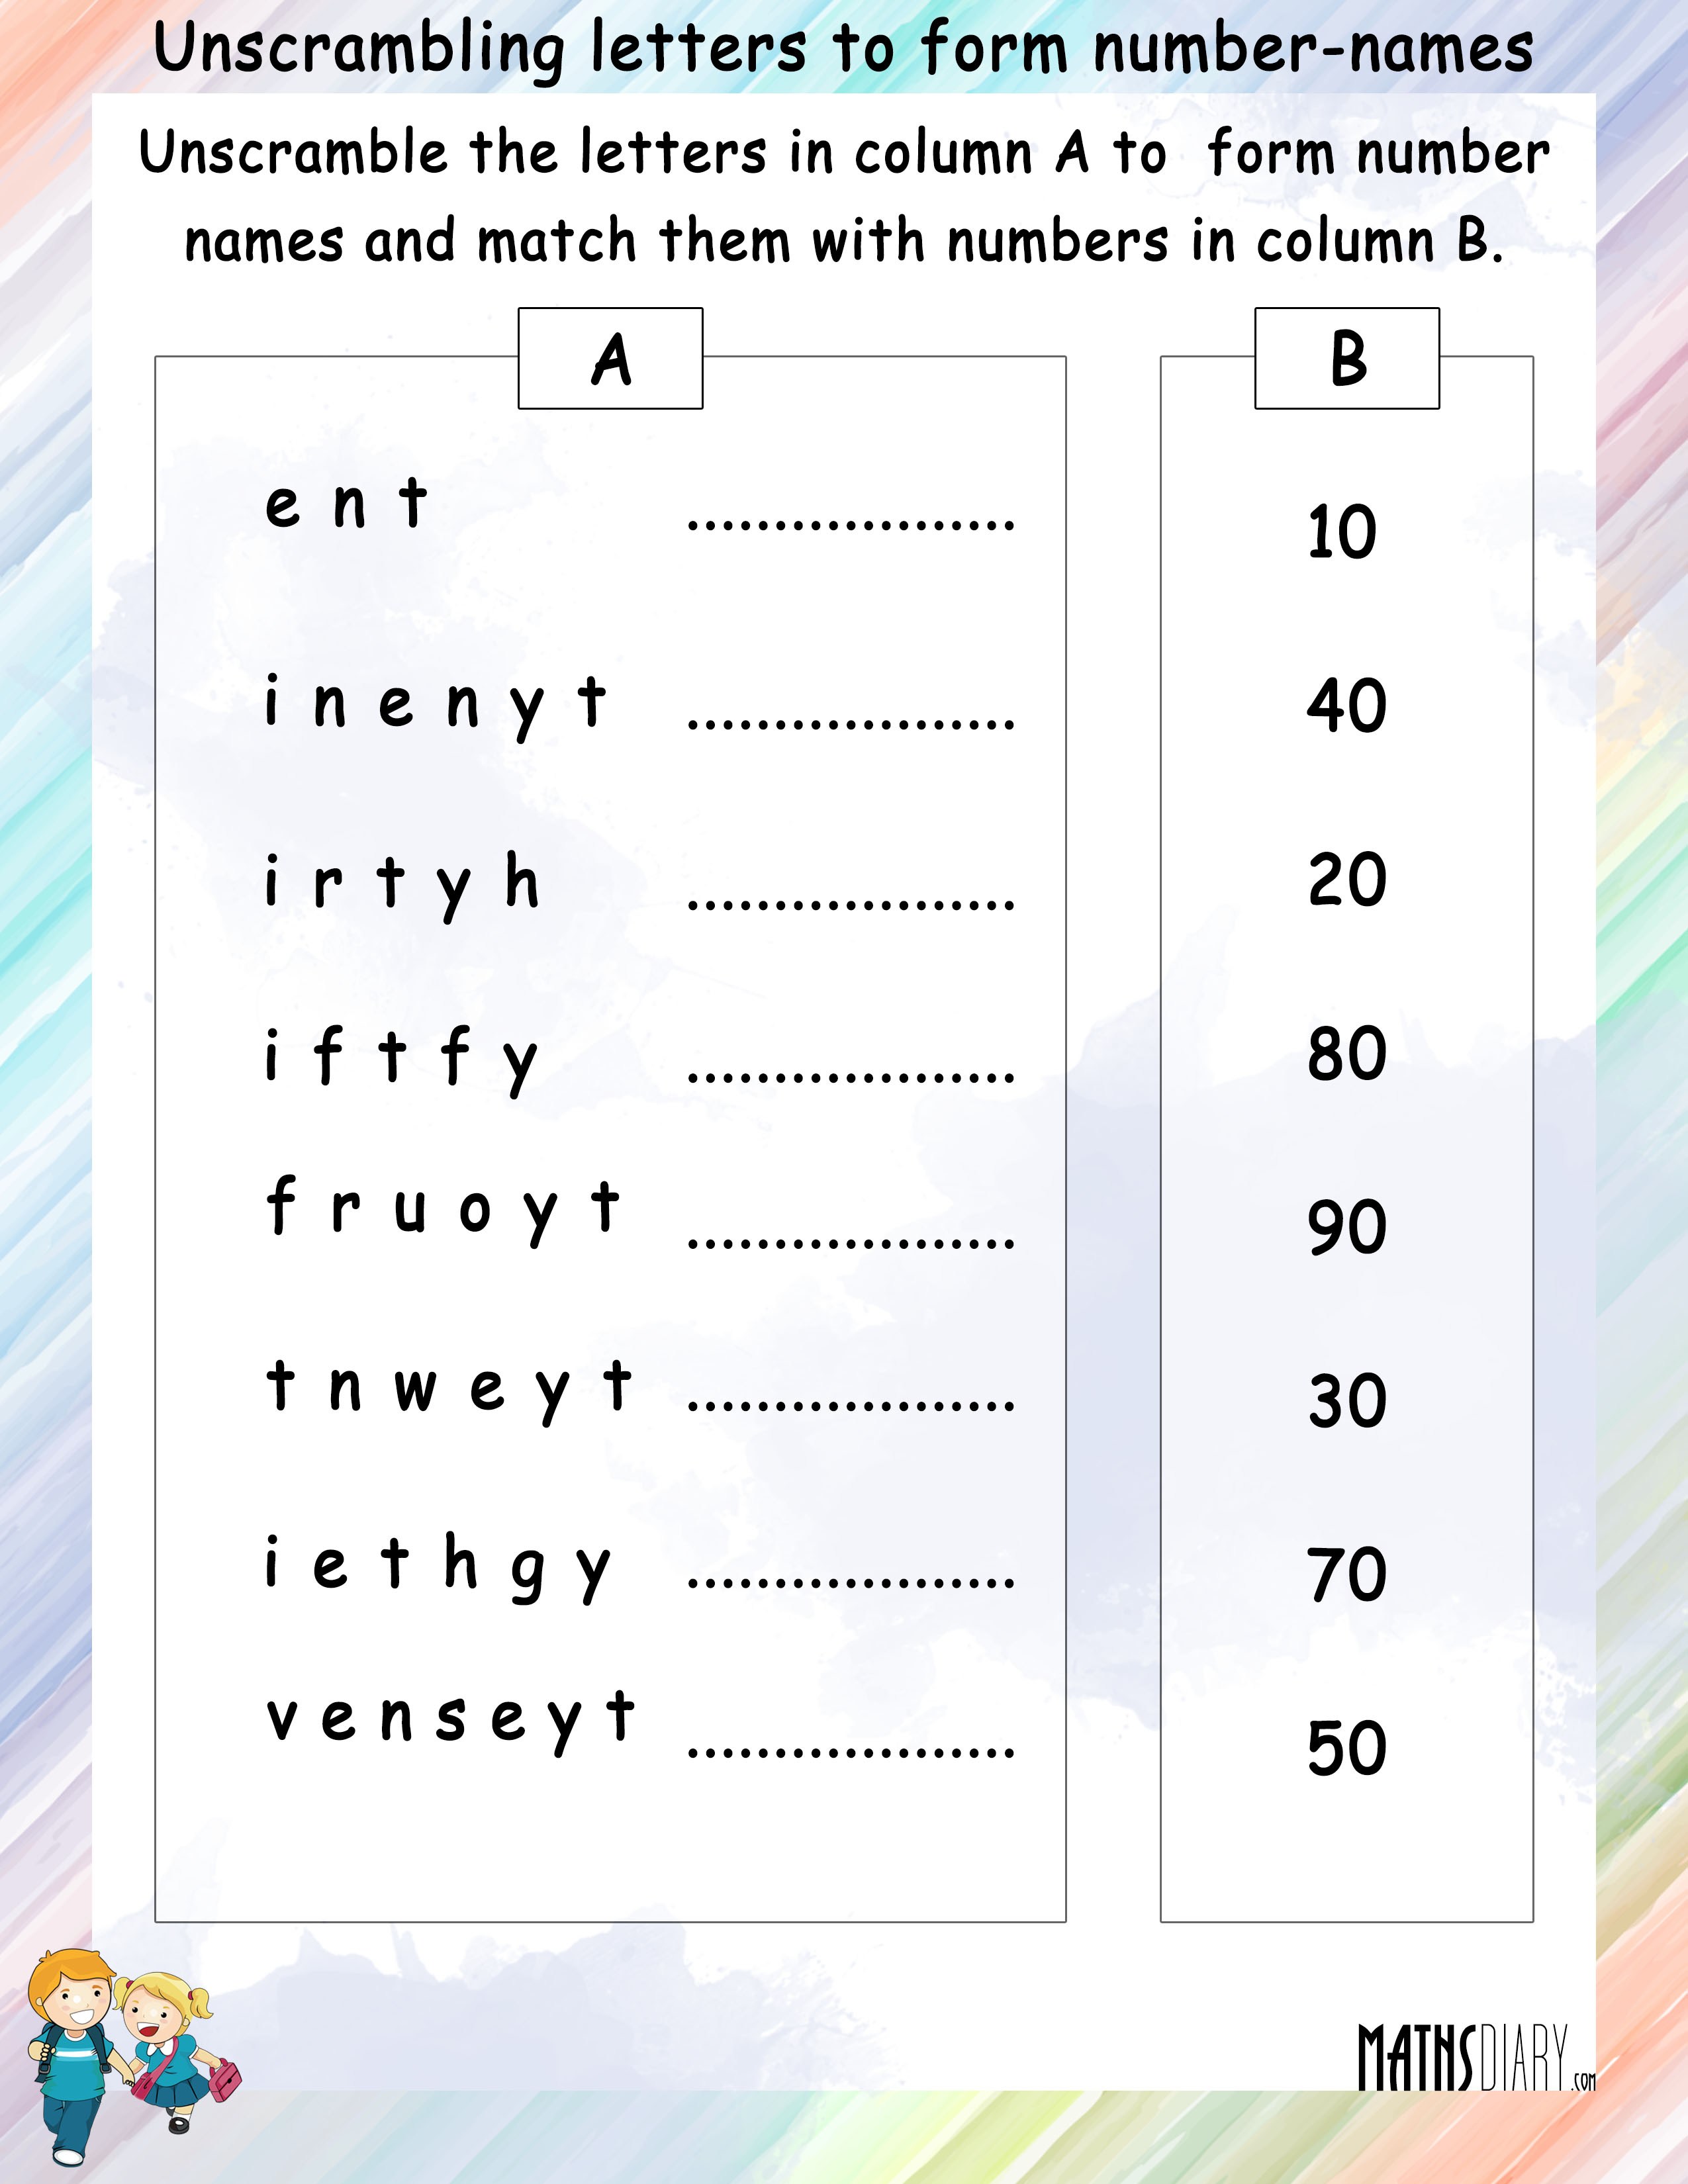 write-number-names-for-given-numbers-math-worksheets-mathsdiarycom-number-words-matching